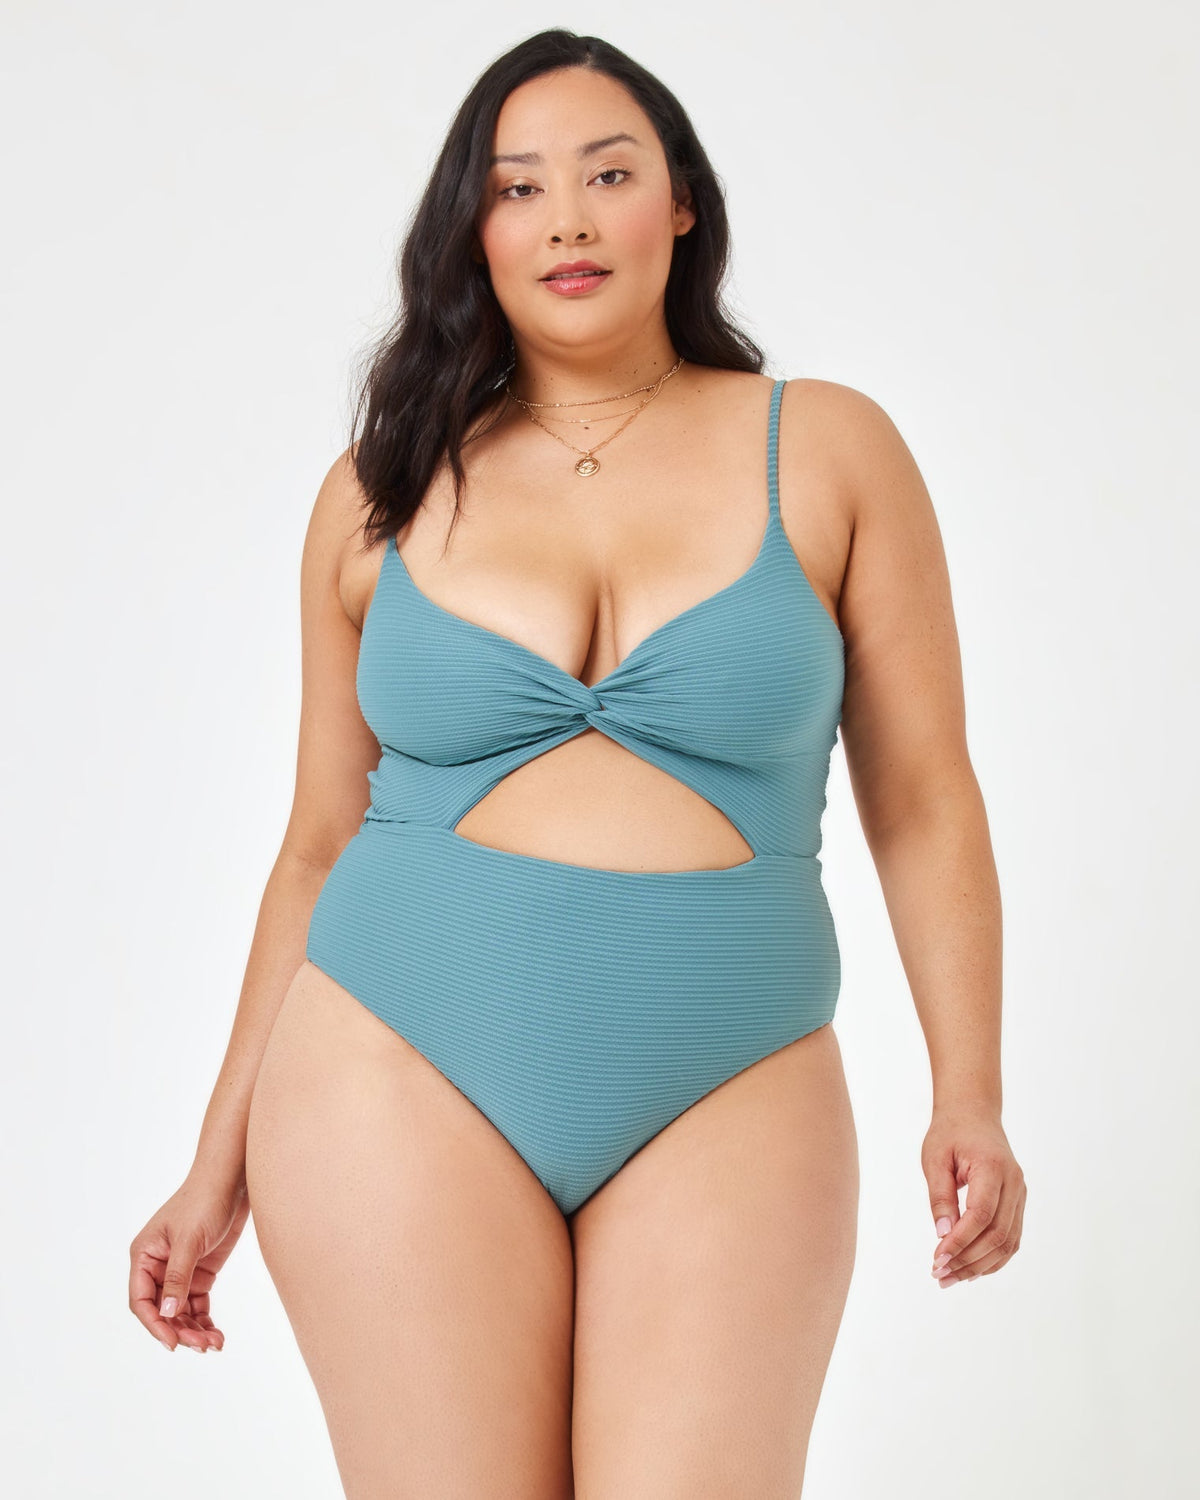 Eco Chic Repreve® Kyslee One Piece Swimsuit - Slated Glass Slated Glass | Model: Bianca (size: XL)